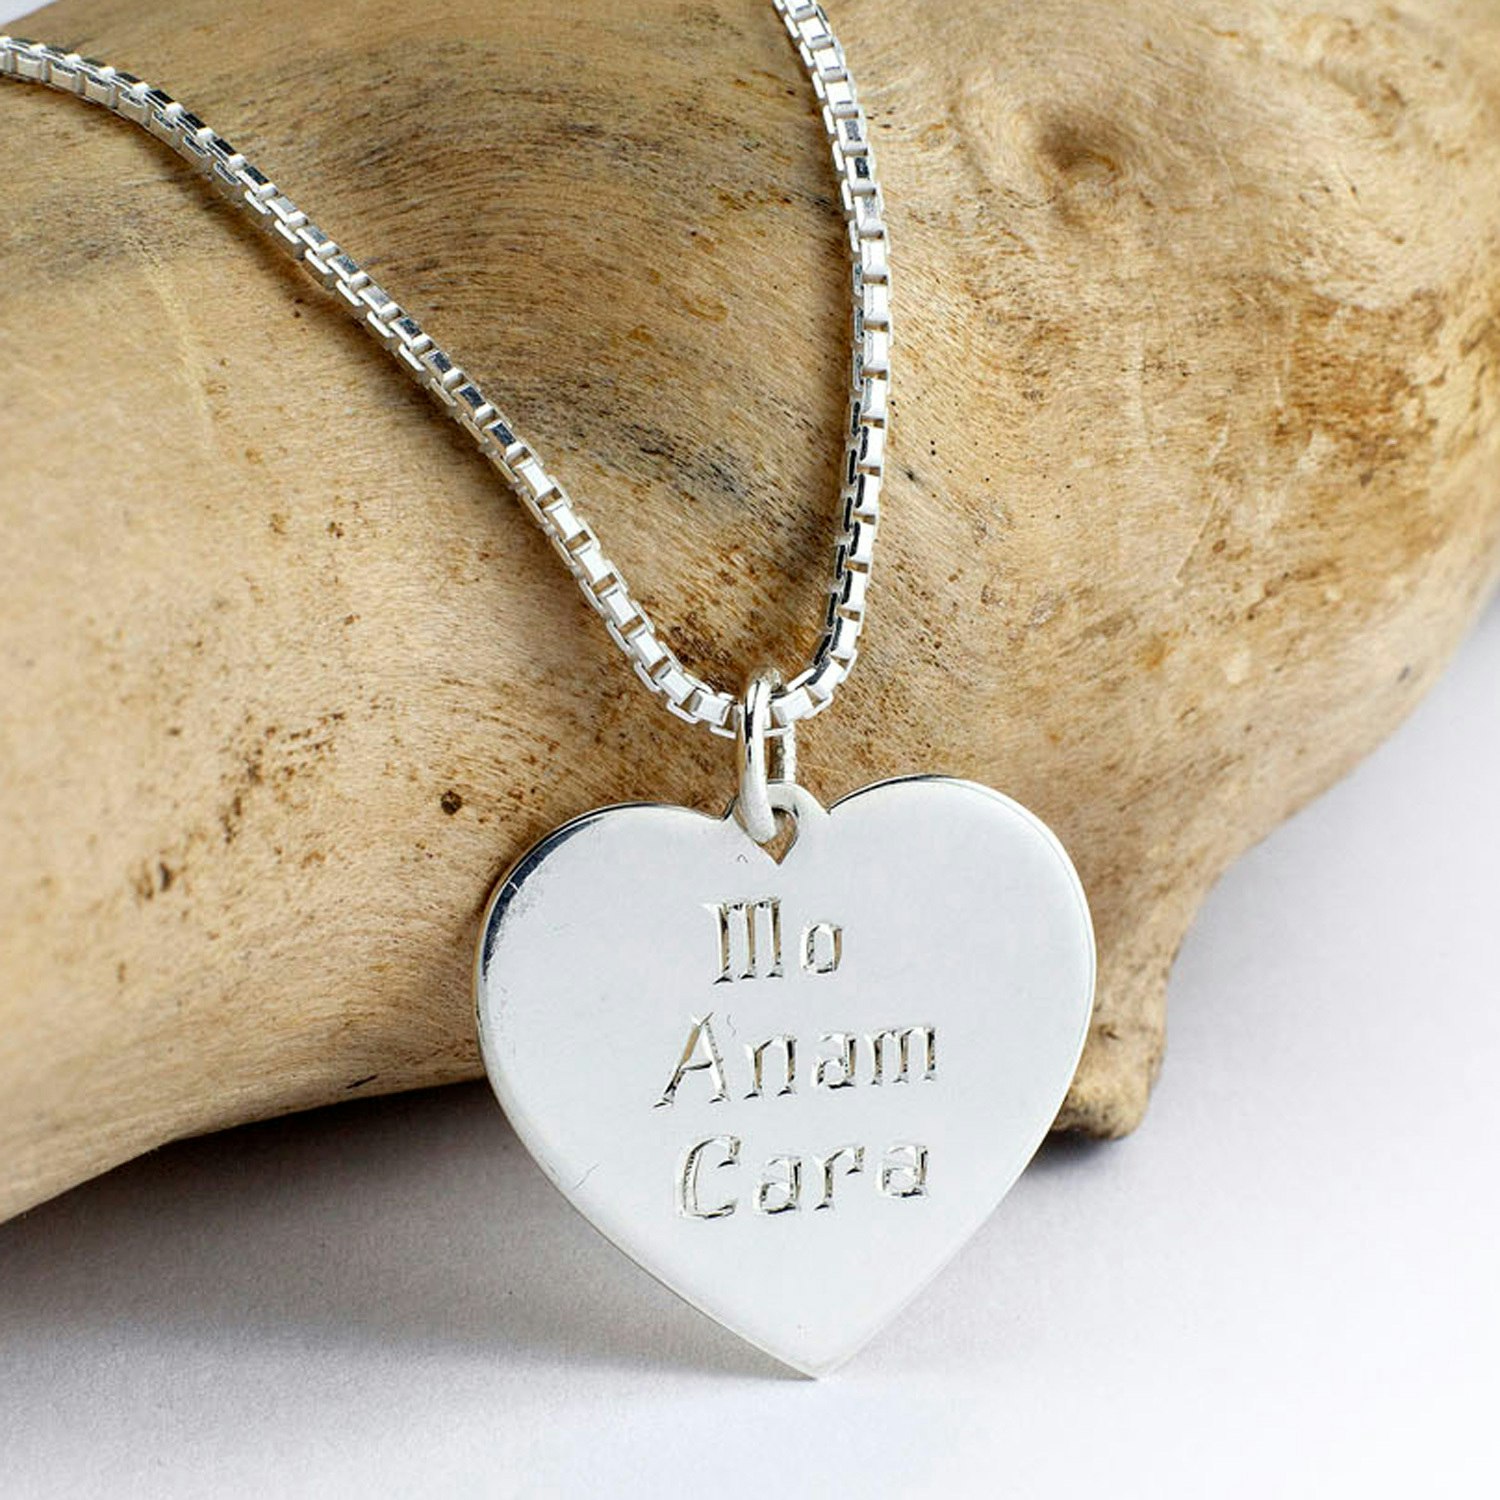 Personalised Engraved Children's Silver Sparkly Heart Necklace - Etsy